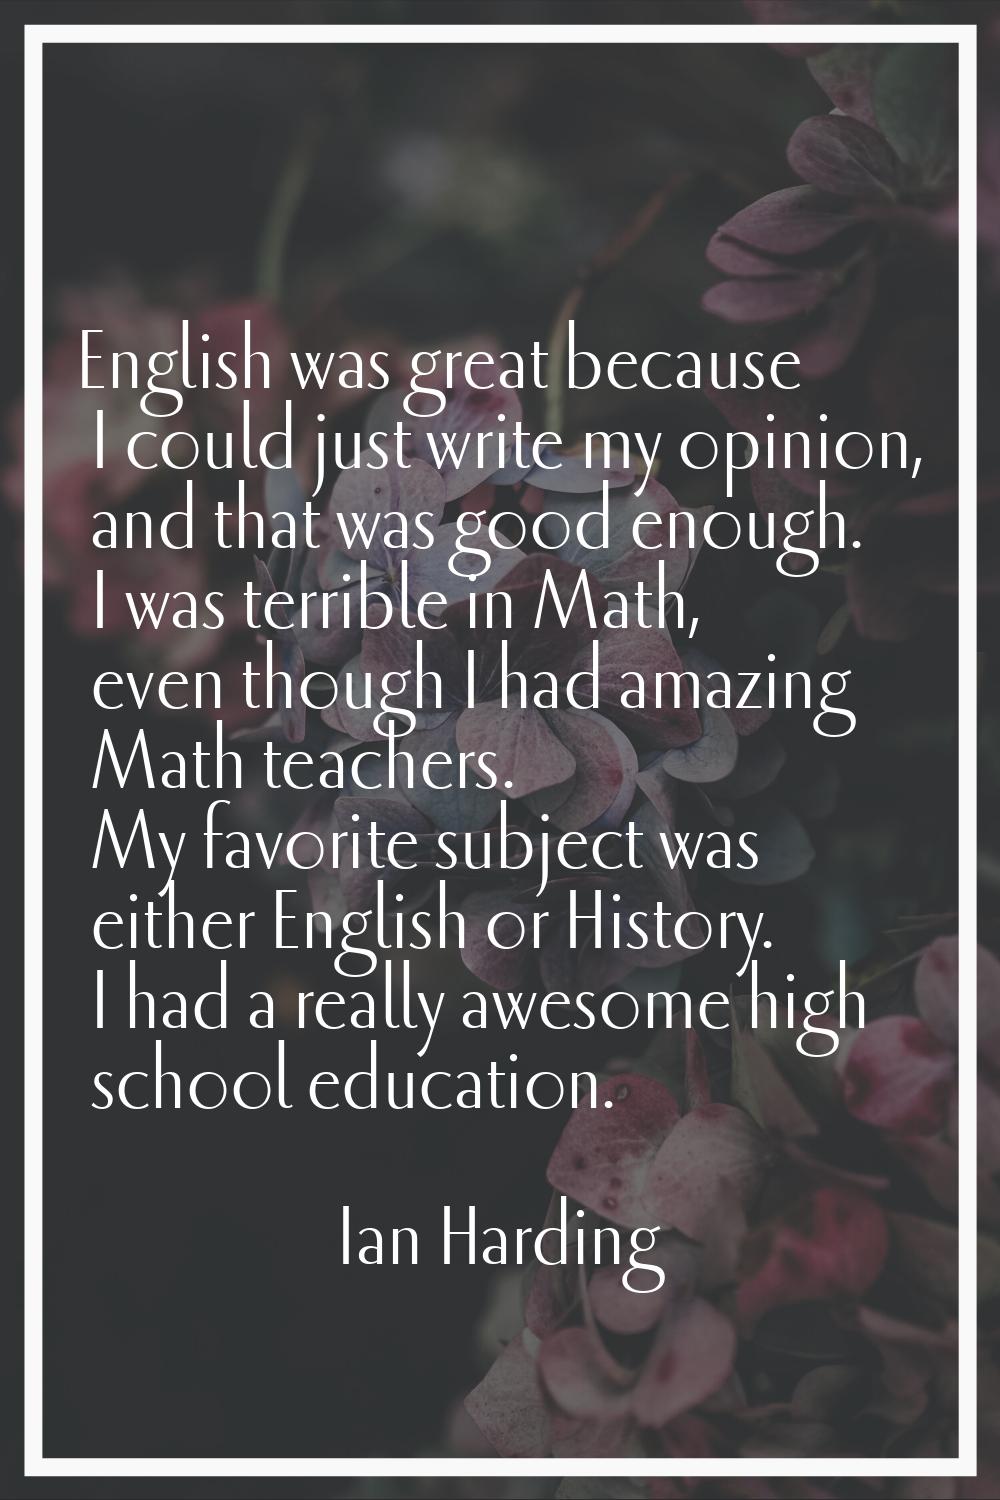 English was great because I could just write my opinion, and that was good enough. I was terrible i